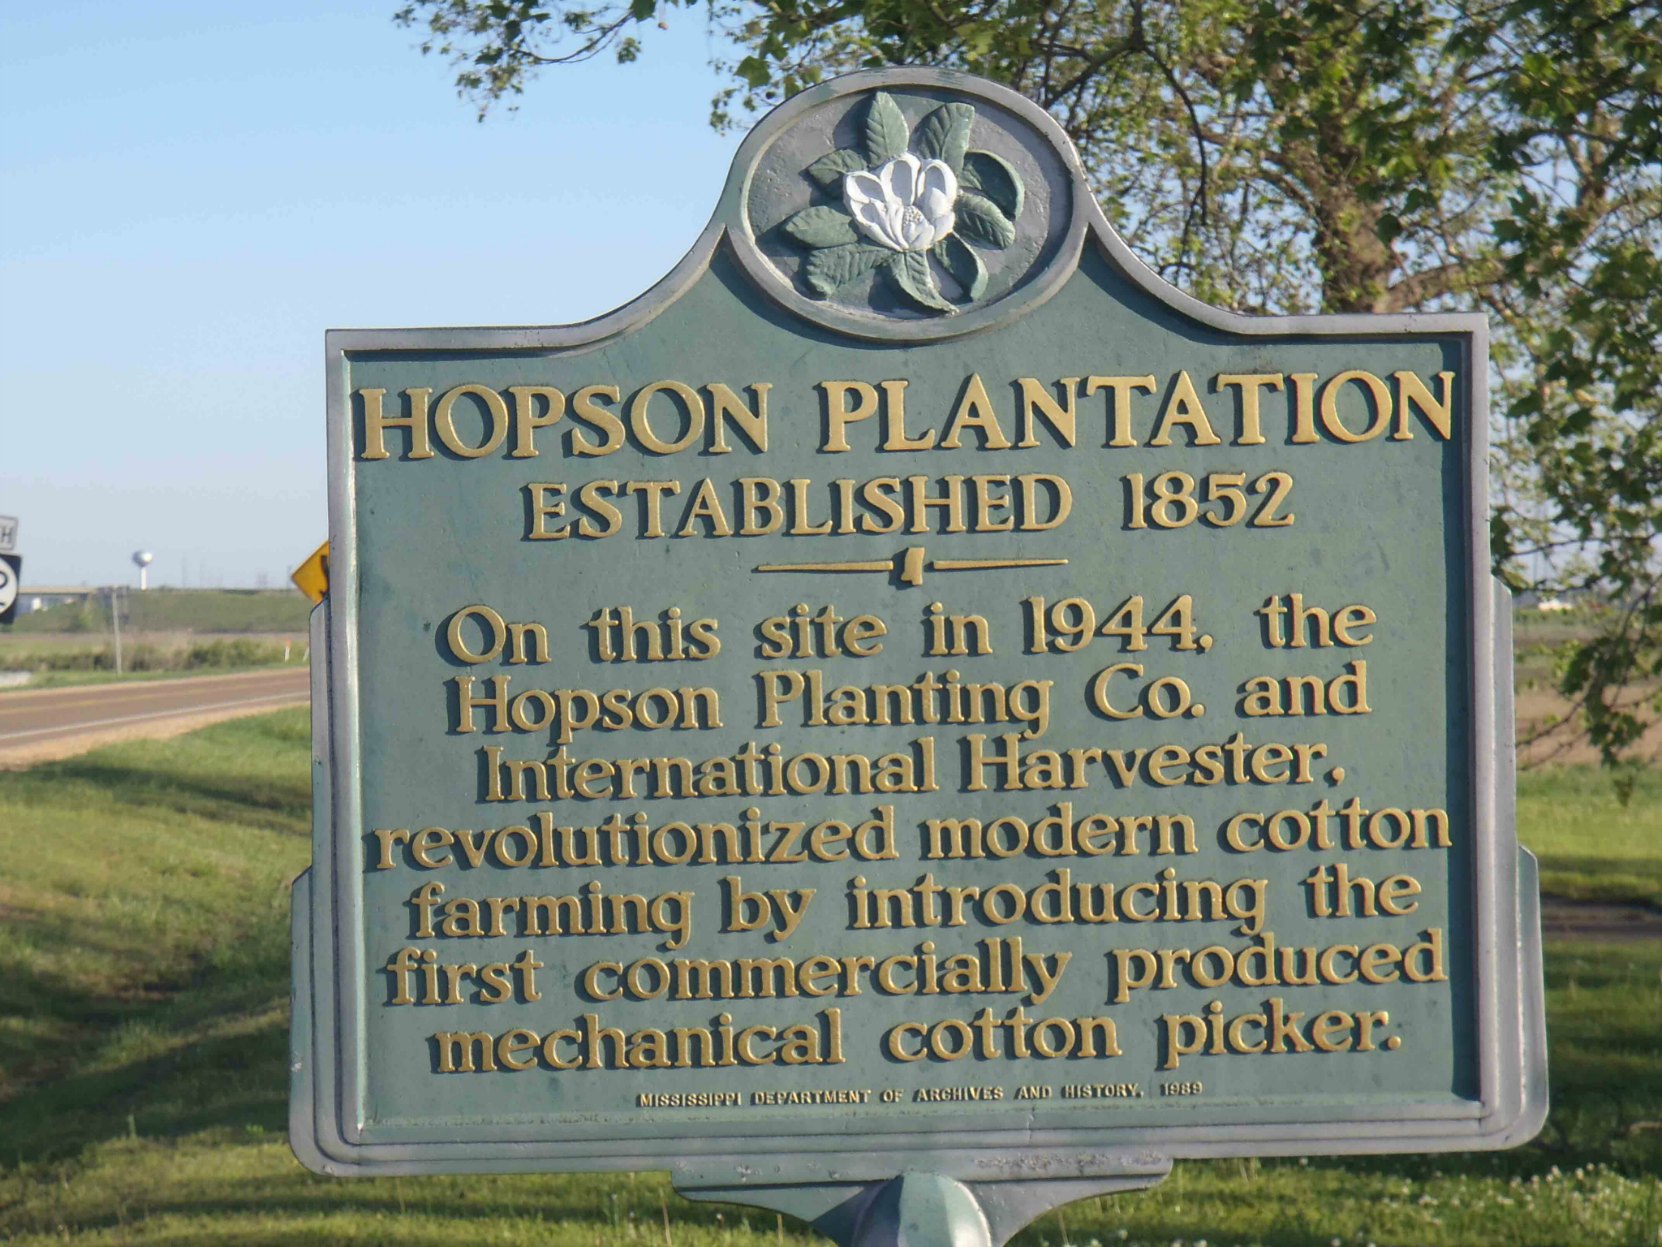 Mississippi Department of Archives & History marker for Hopson Plantation, Highway 49 at Hopson Farm, Coahoma County, Mississippi.